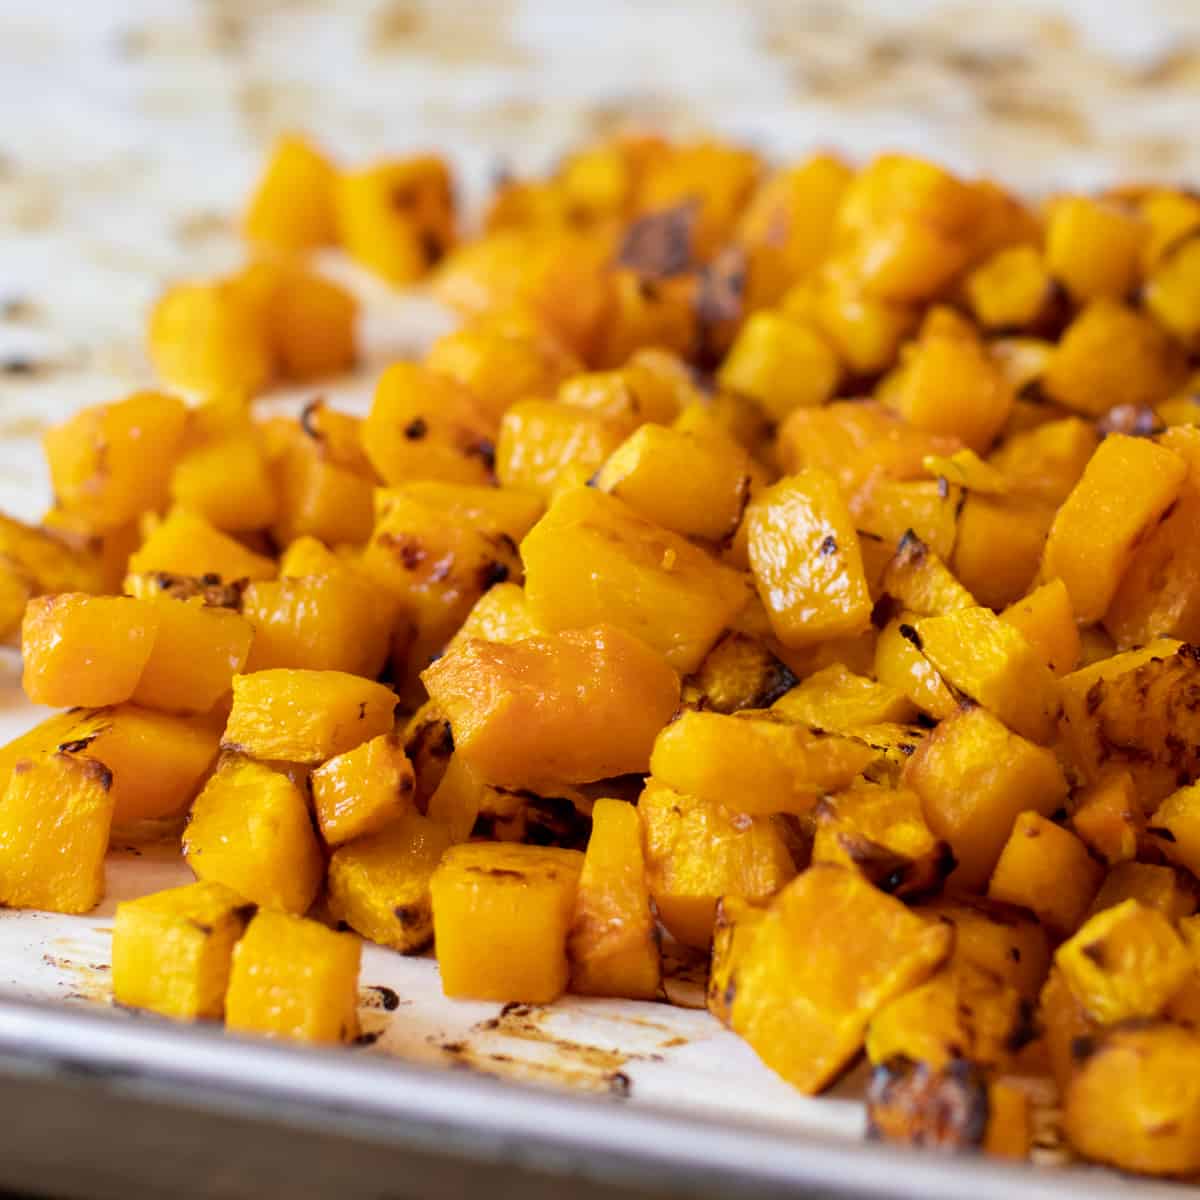 A pile of cubes of cooked squash.